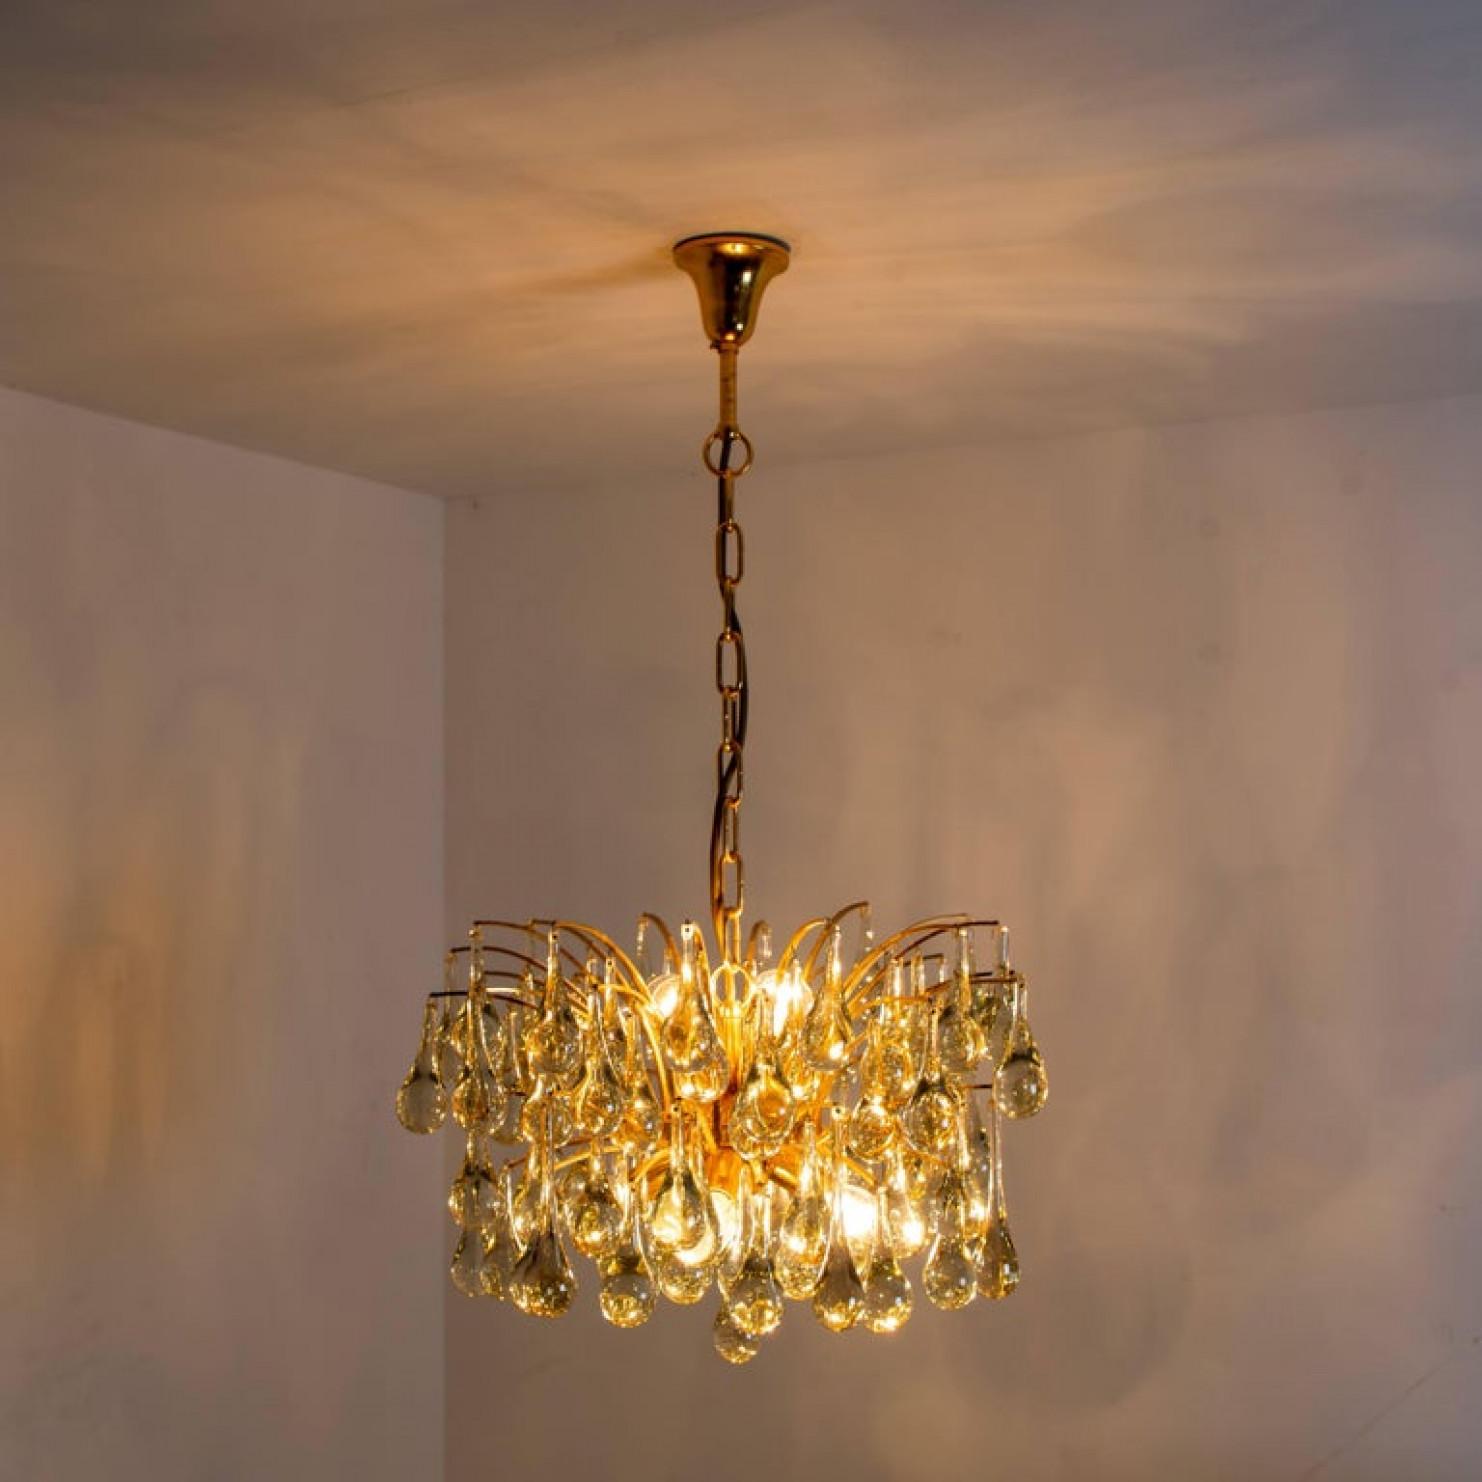 1 of the 2 Large Brass and Crystal Chandeliers, Ernst Palme, Germany, 1970s For Sale 7